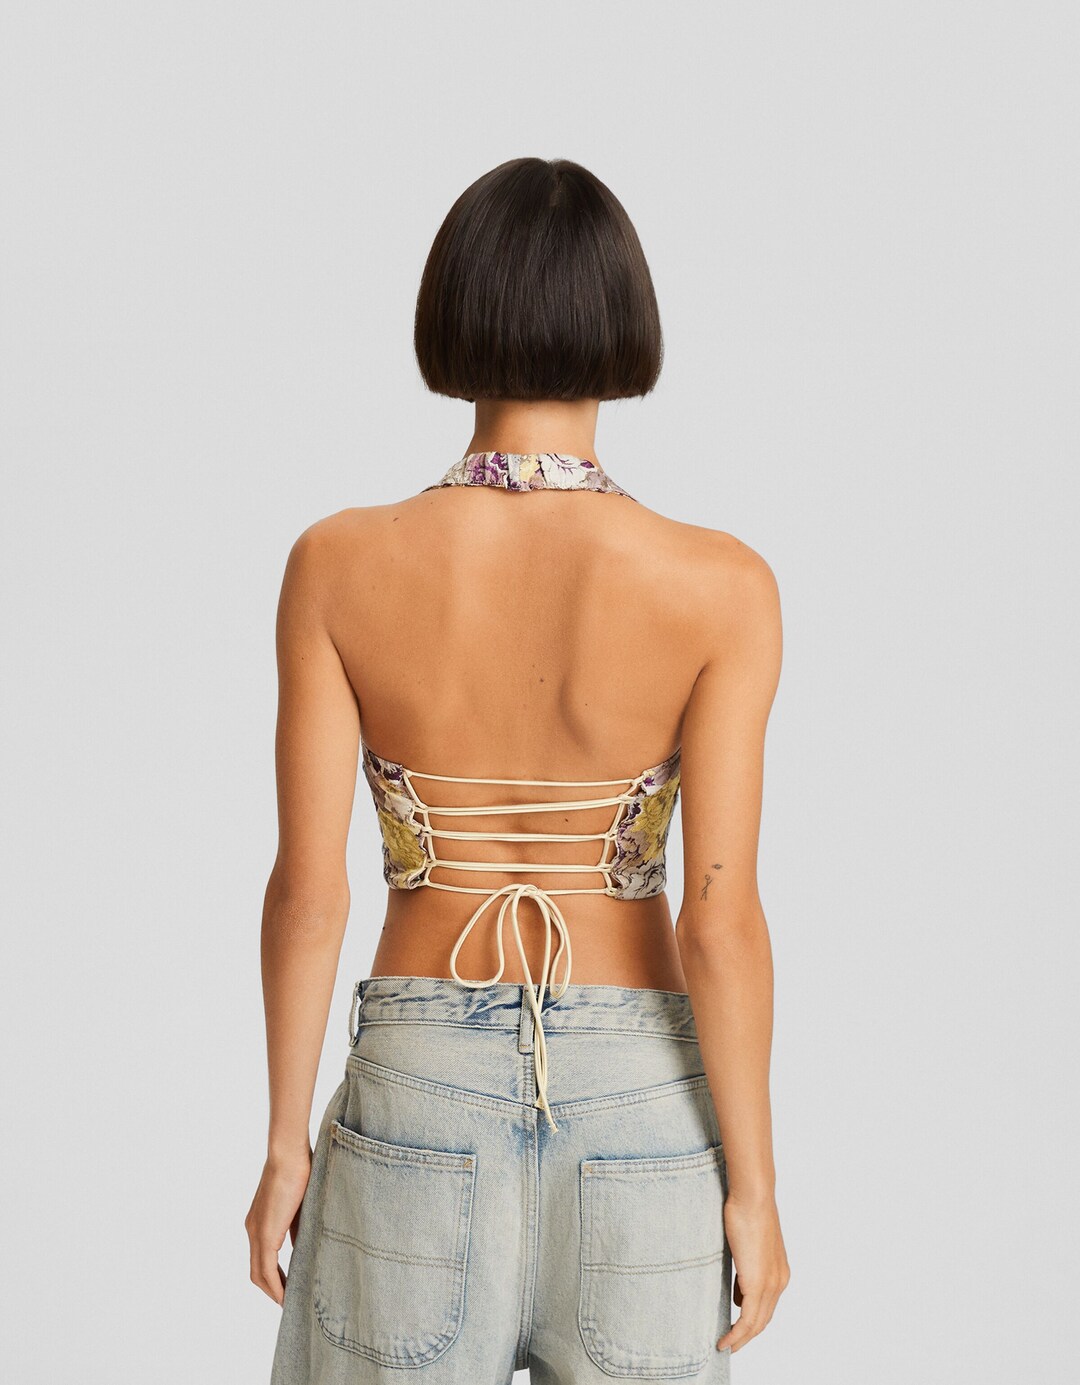 Jacquard open back top with tie